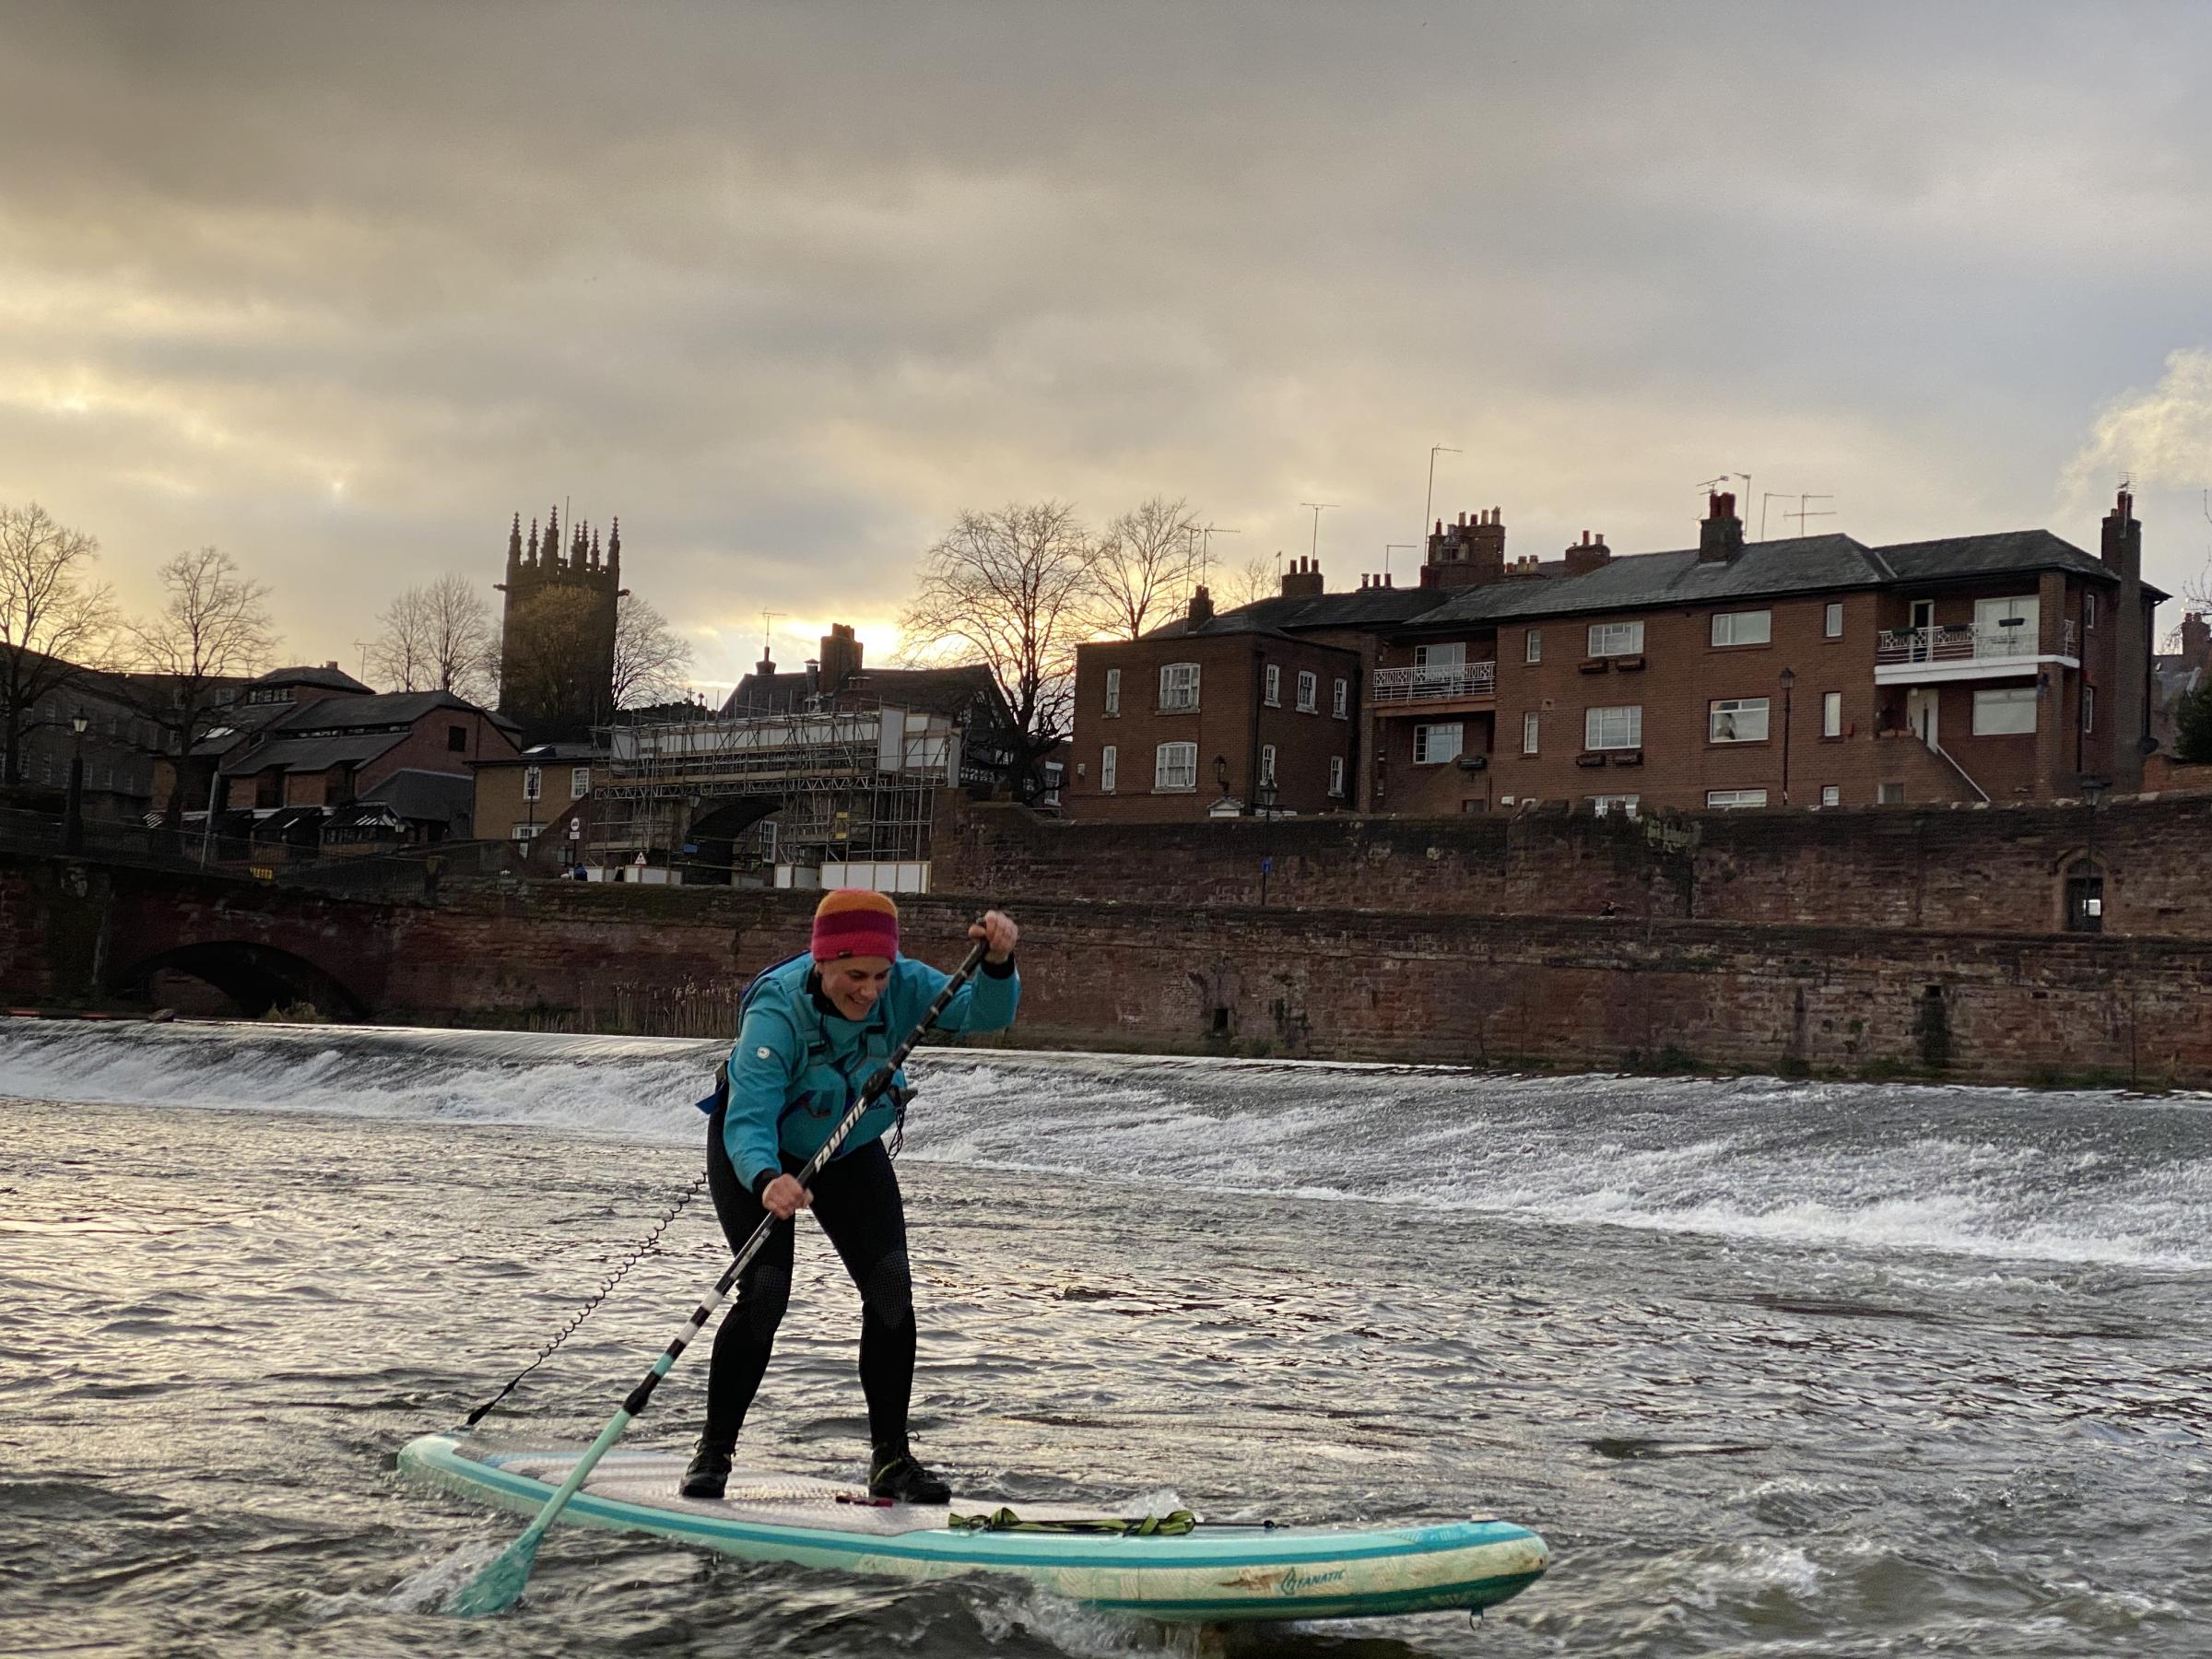 Stand up paddleboarding on the River Dee, Chester.